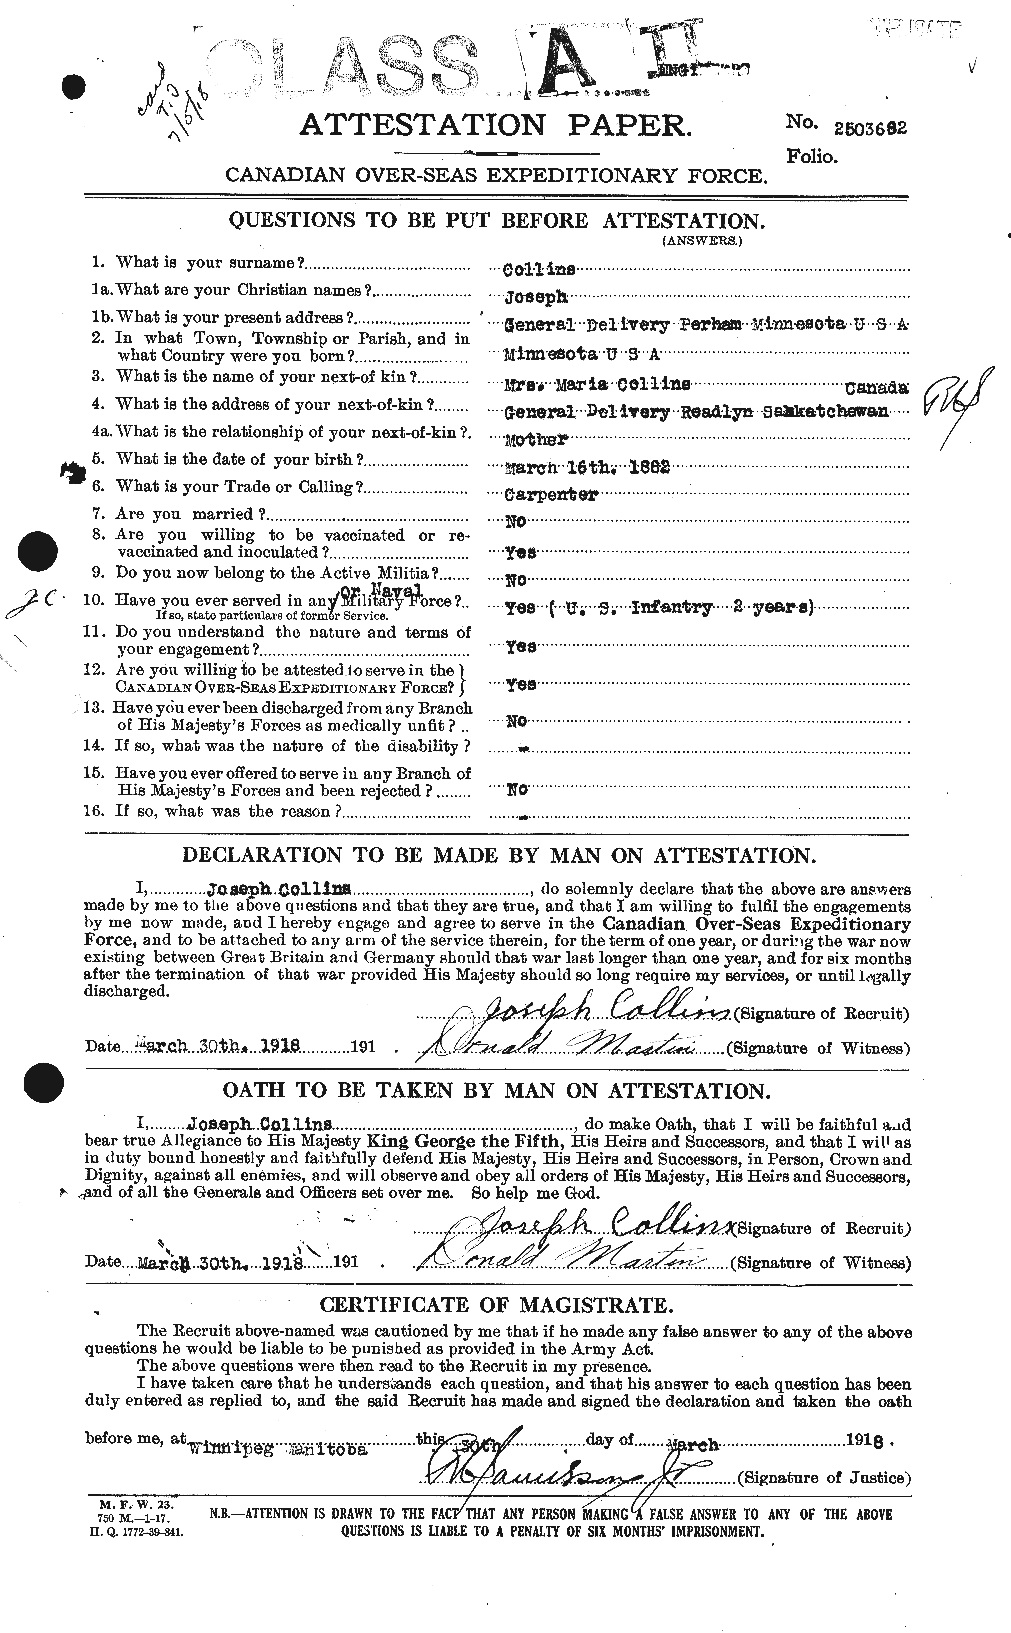 Personnel Records of the First World War - CEF 069519a